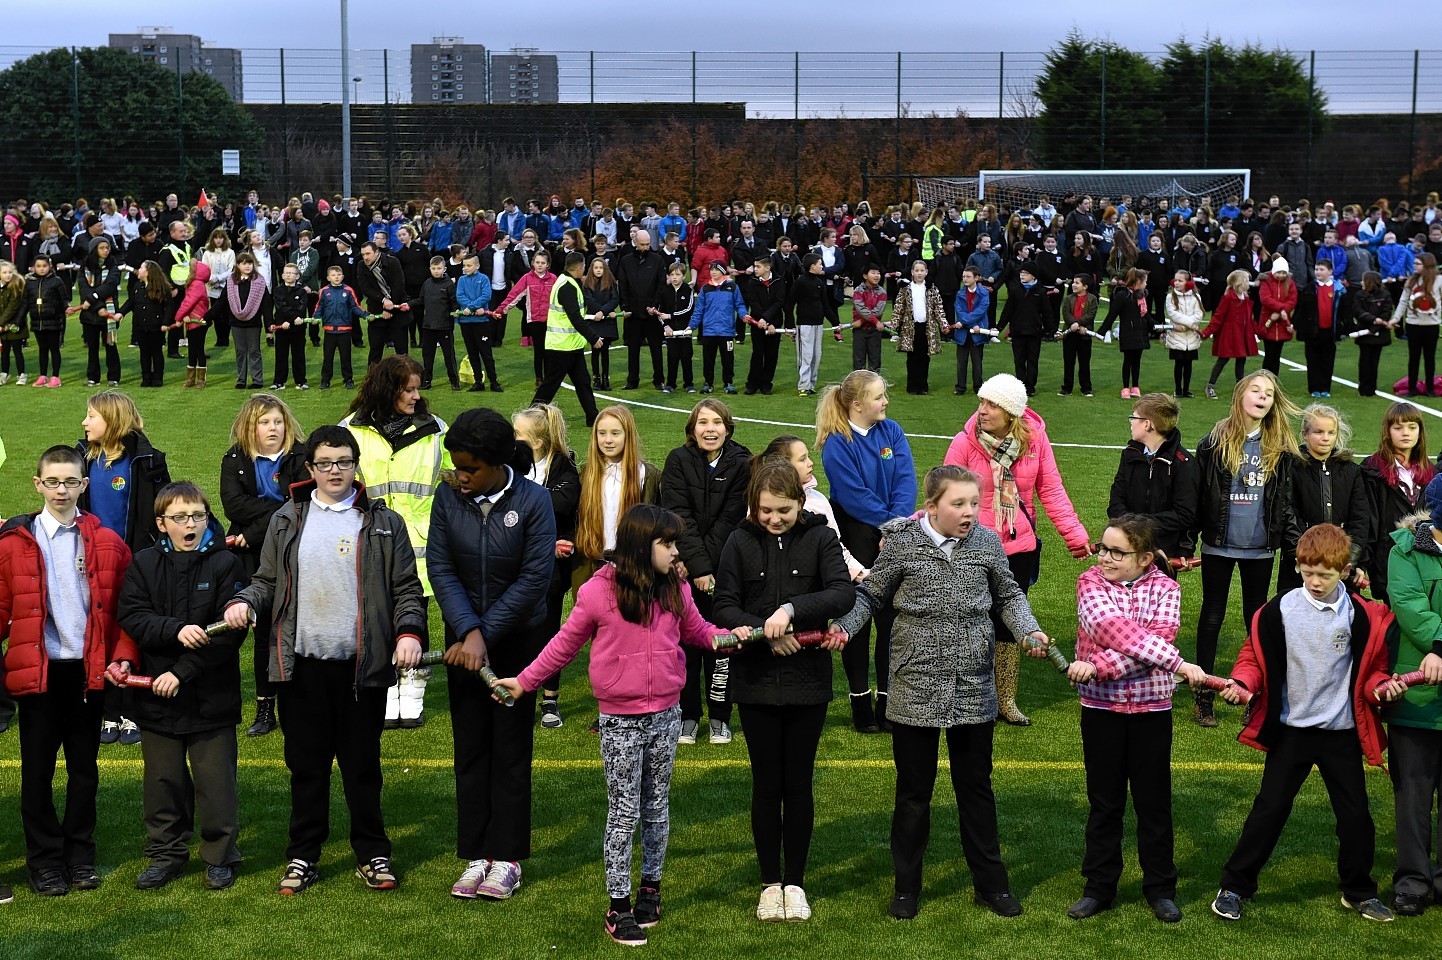 Northfield Academy pupils try to break world record for longest chain of Christmas crackers pulled at the same time